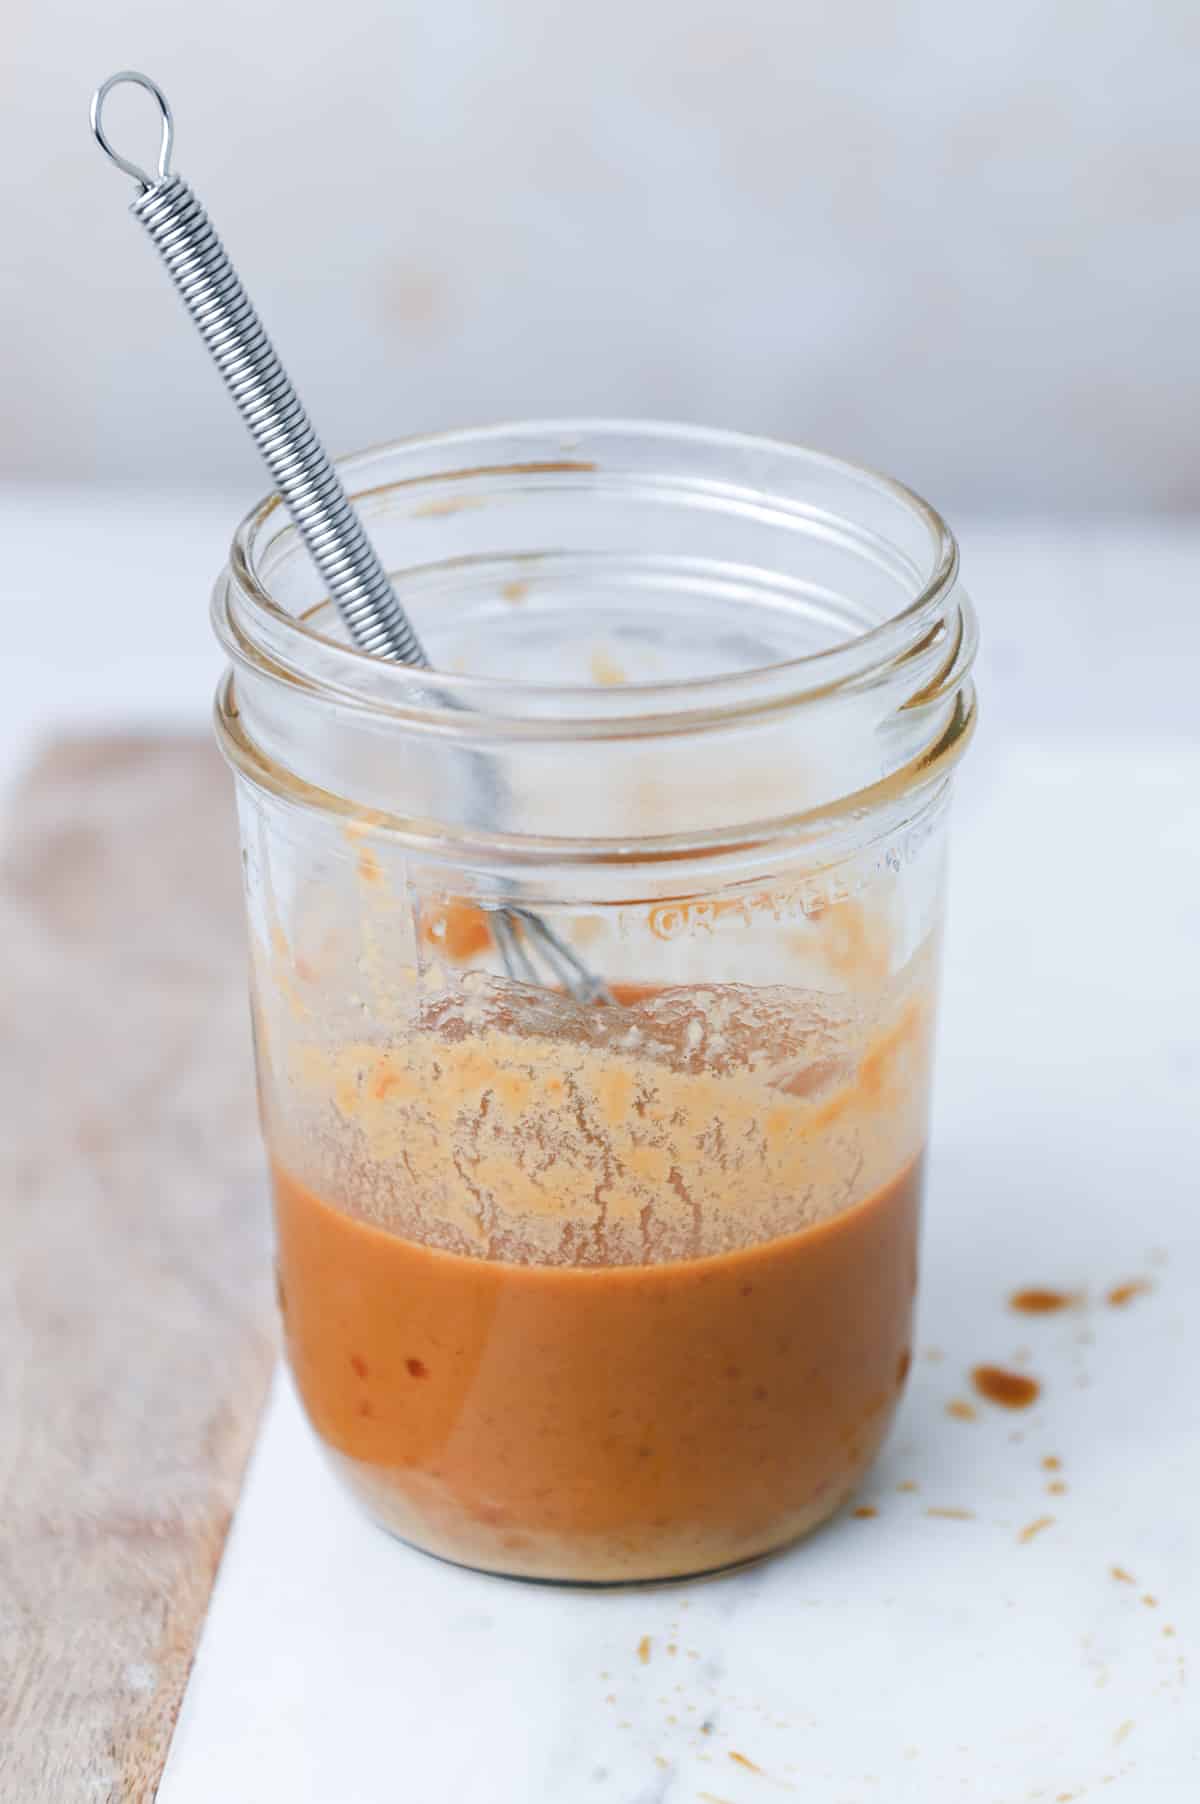 Peanut sauce in a glass jar with a small whisk.